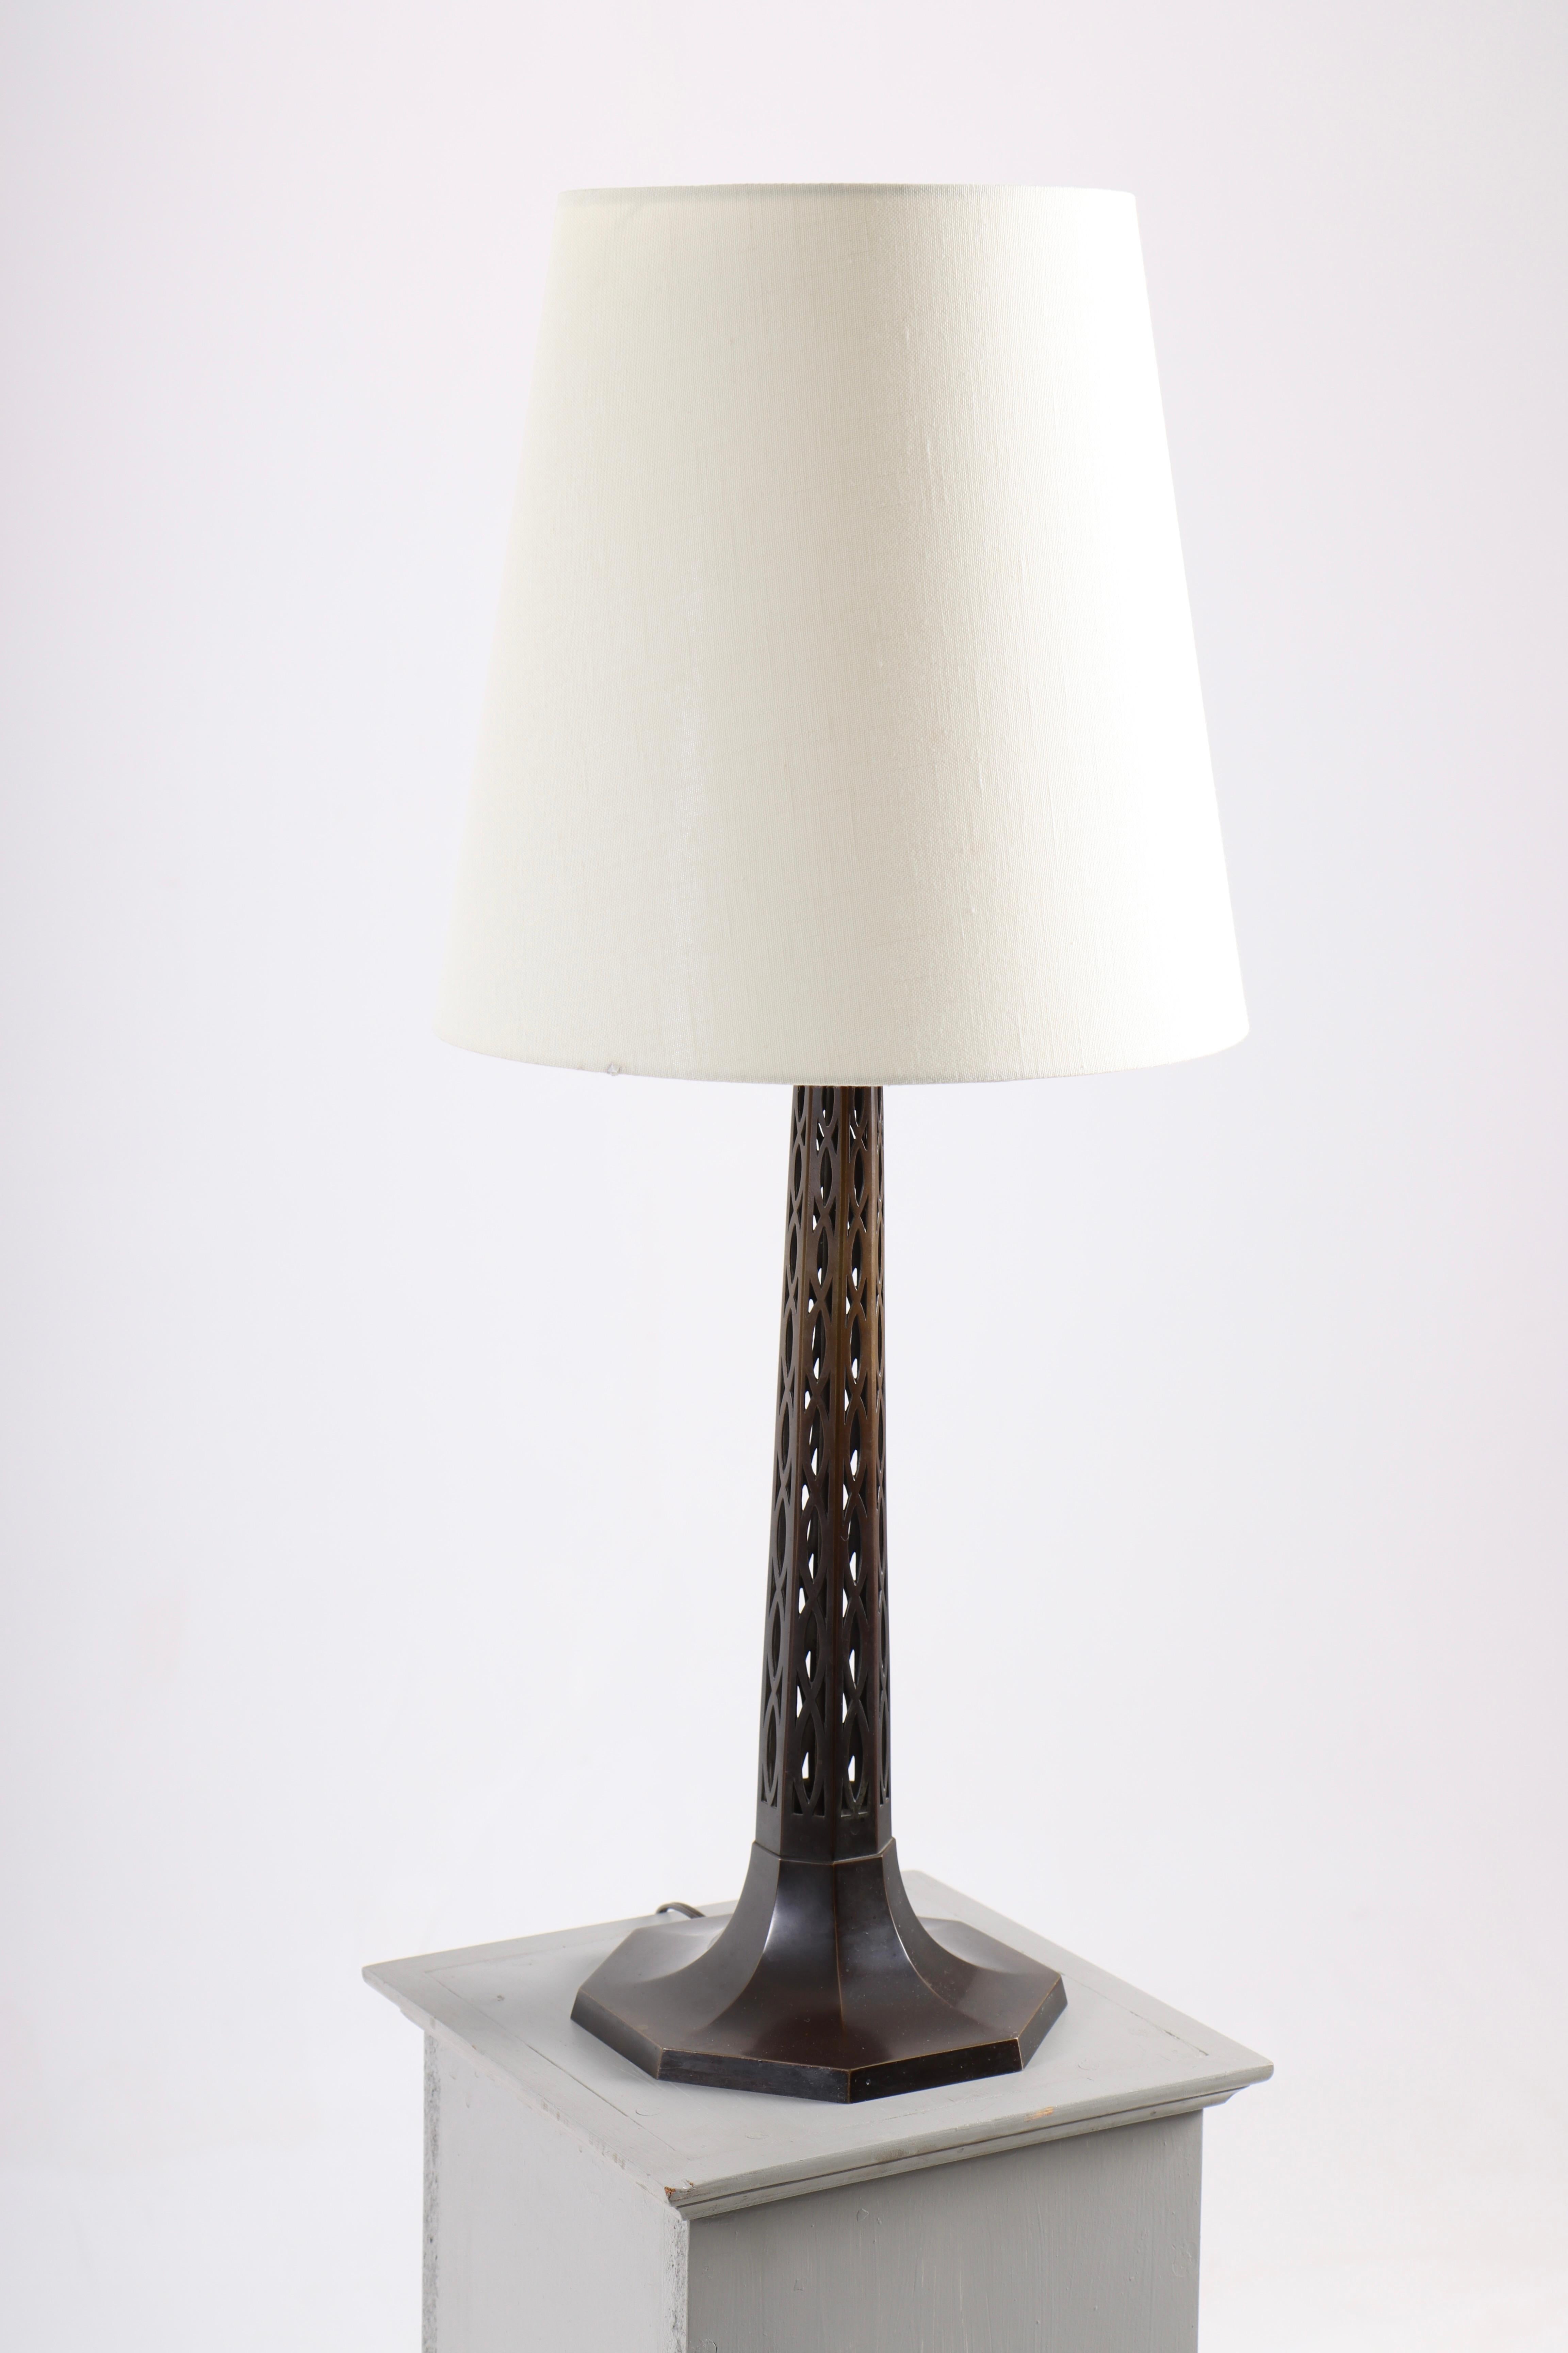 Mid-Century Danish Table Lamp in Brass, 1950s For Sale 5